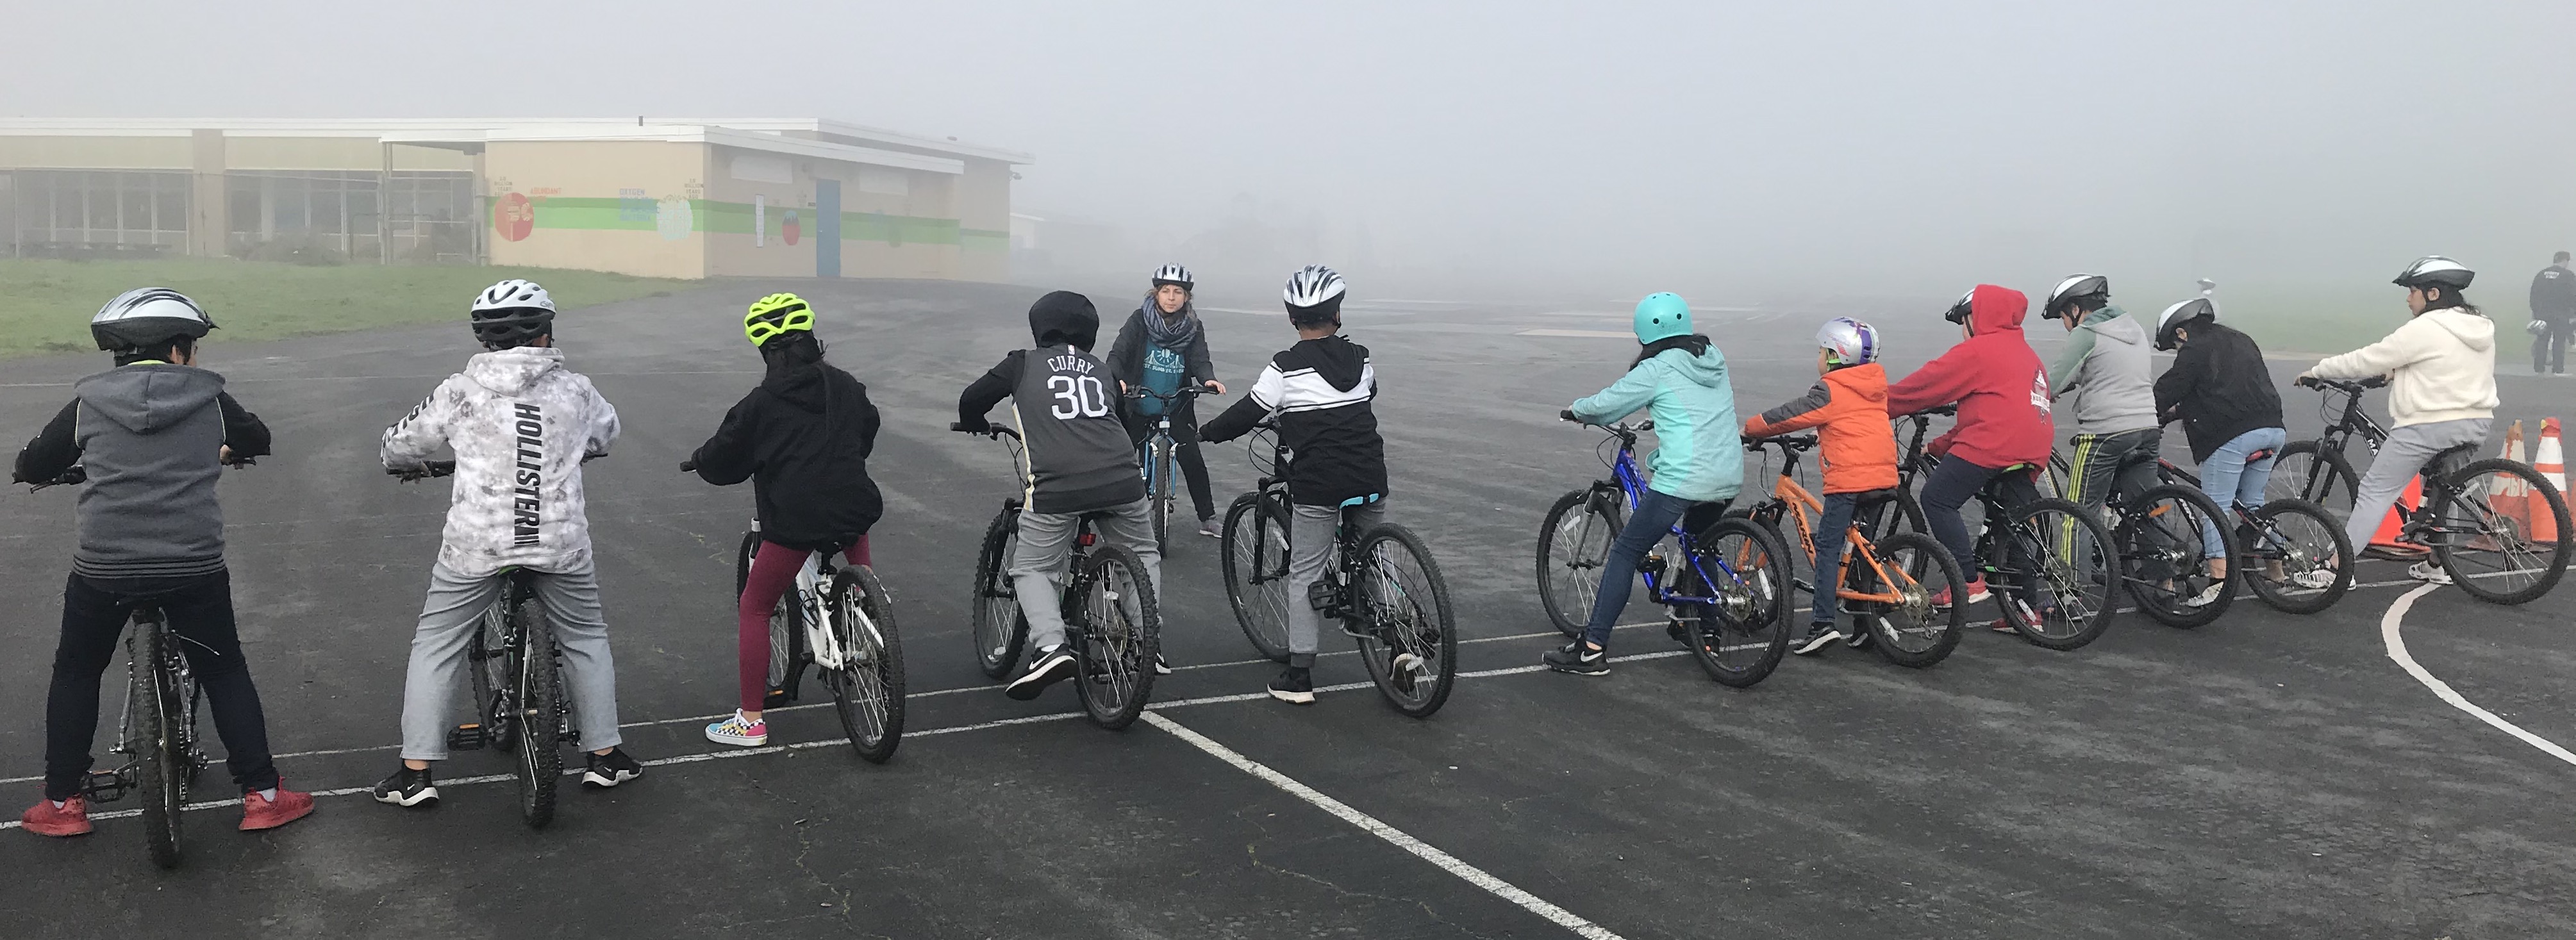 students on bikes lined up in a row on the playground